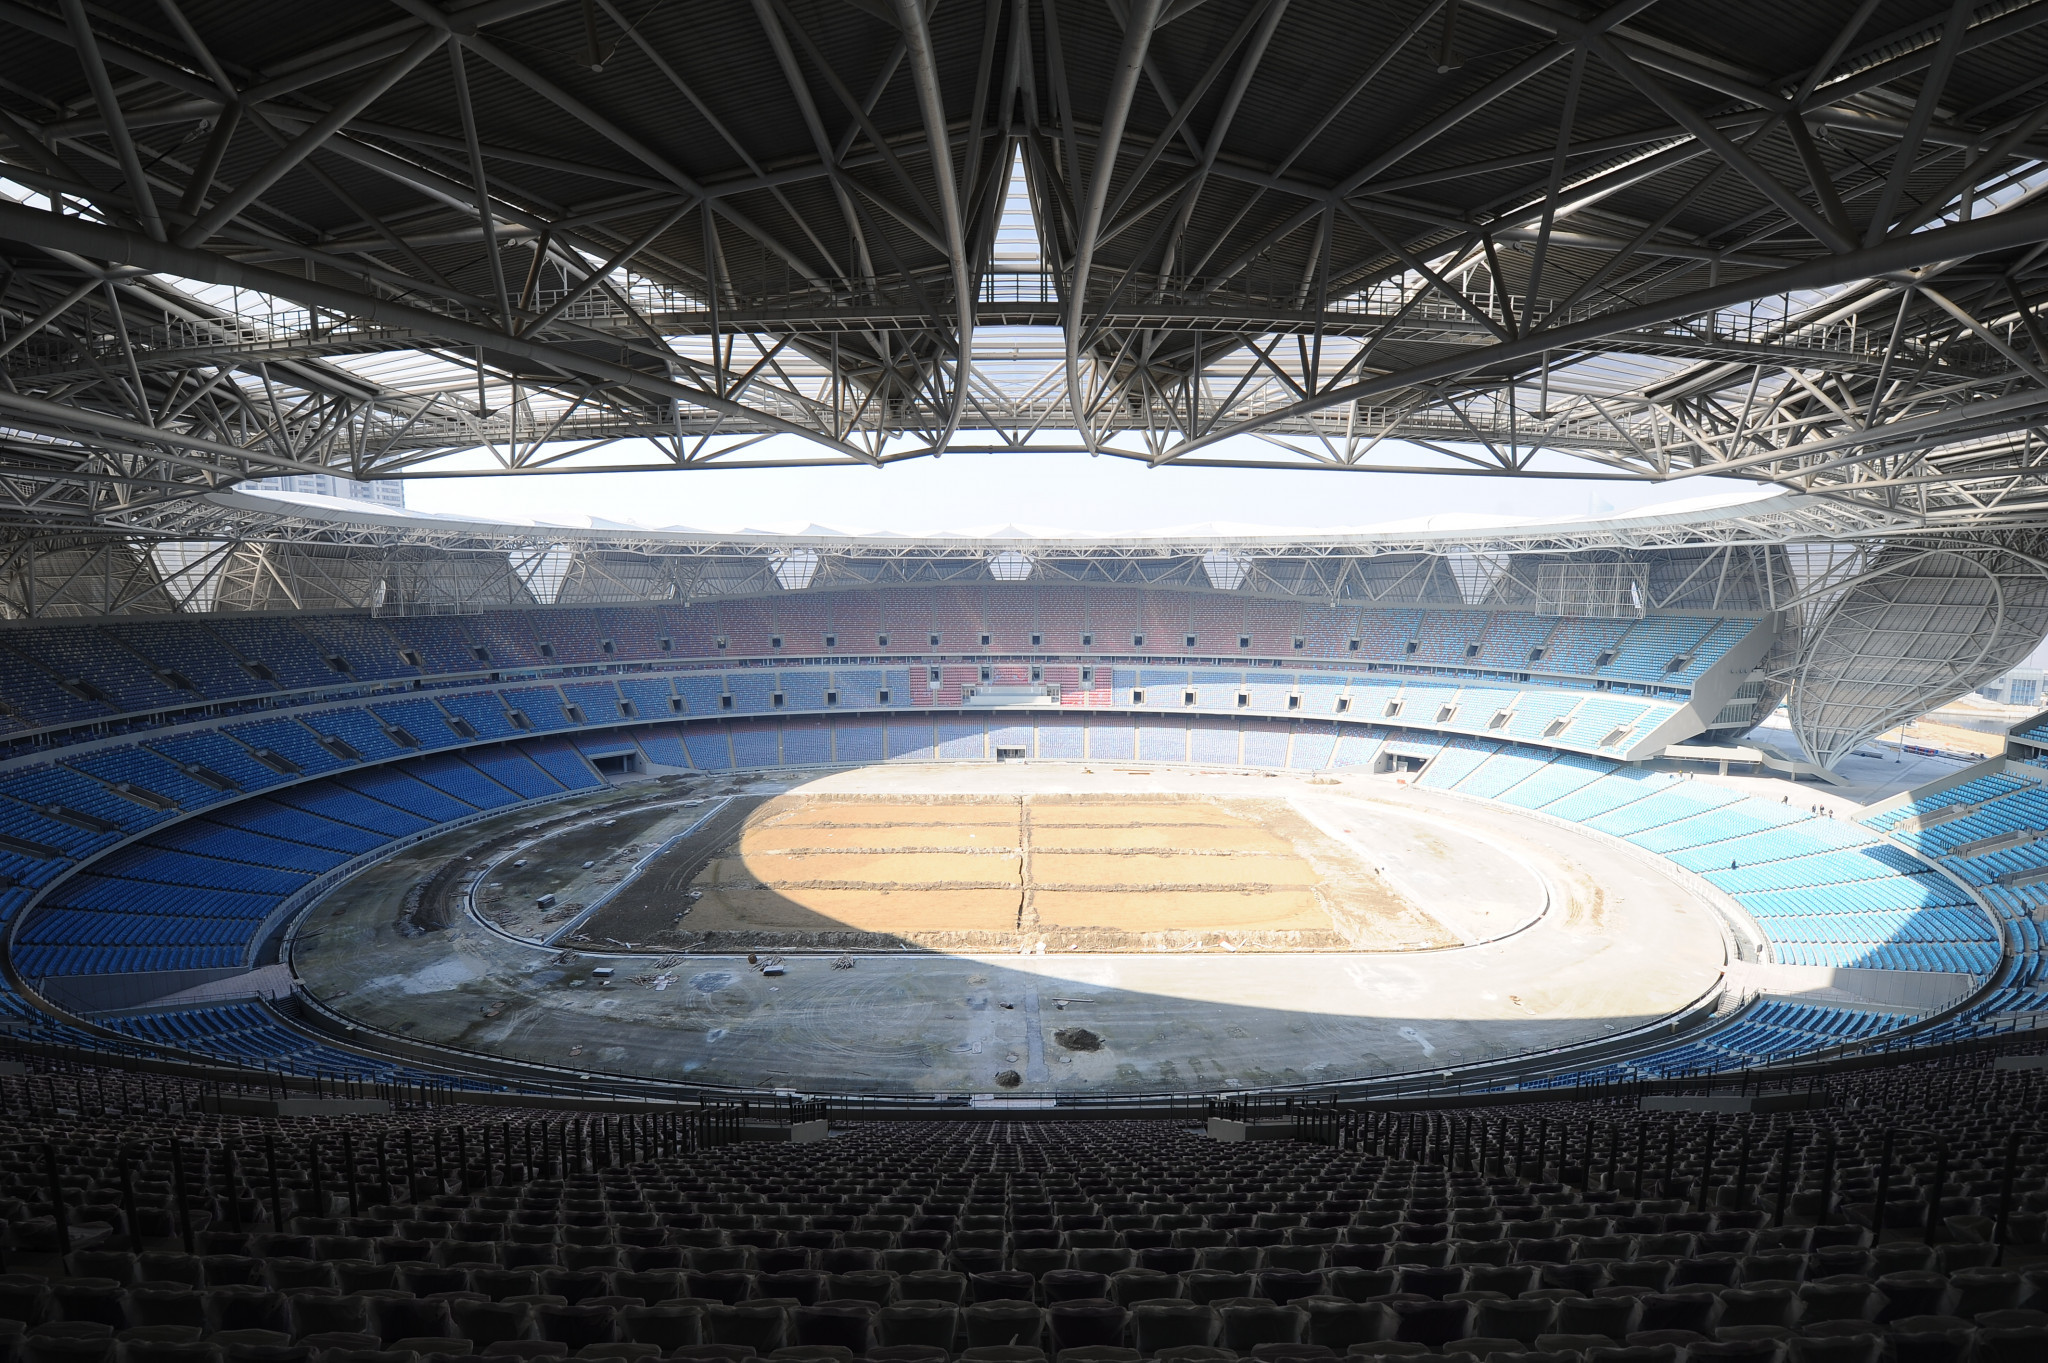 Main stadium and aquatics centre for Hangzhou 2022 given final approval